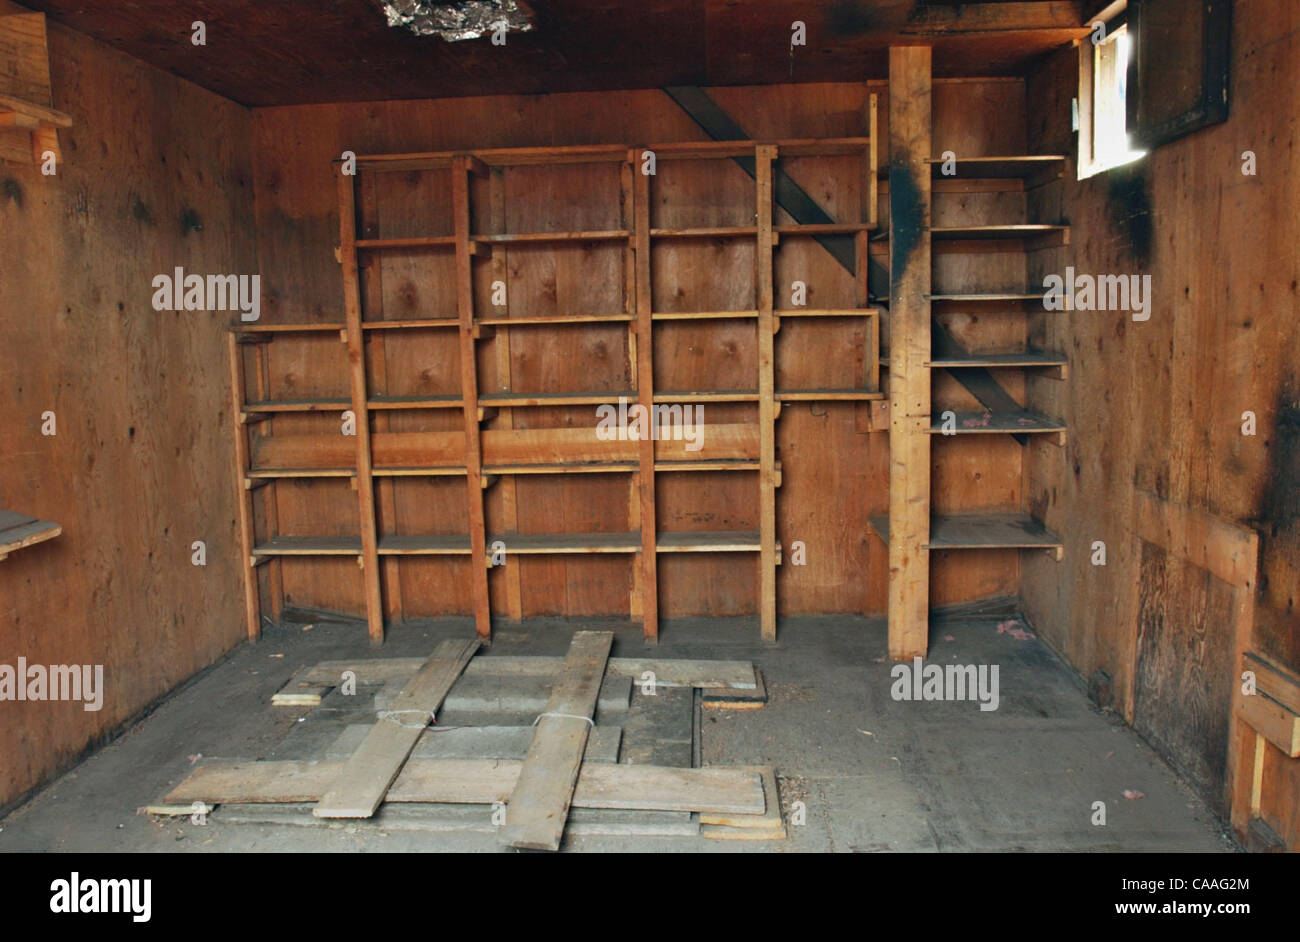 May 01, 2003; Sacramento, CA, USA; Interior of the cabin: The 10' x 13' wooden cabin that Ted Kaczynski, the convicted Unabomber, lived in in Montana has been transfered to private ownership today, Thursday, May 1, 2003.  The structure was supposed to be dismantled and removed from a storage facilit Stock Photo